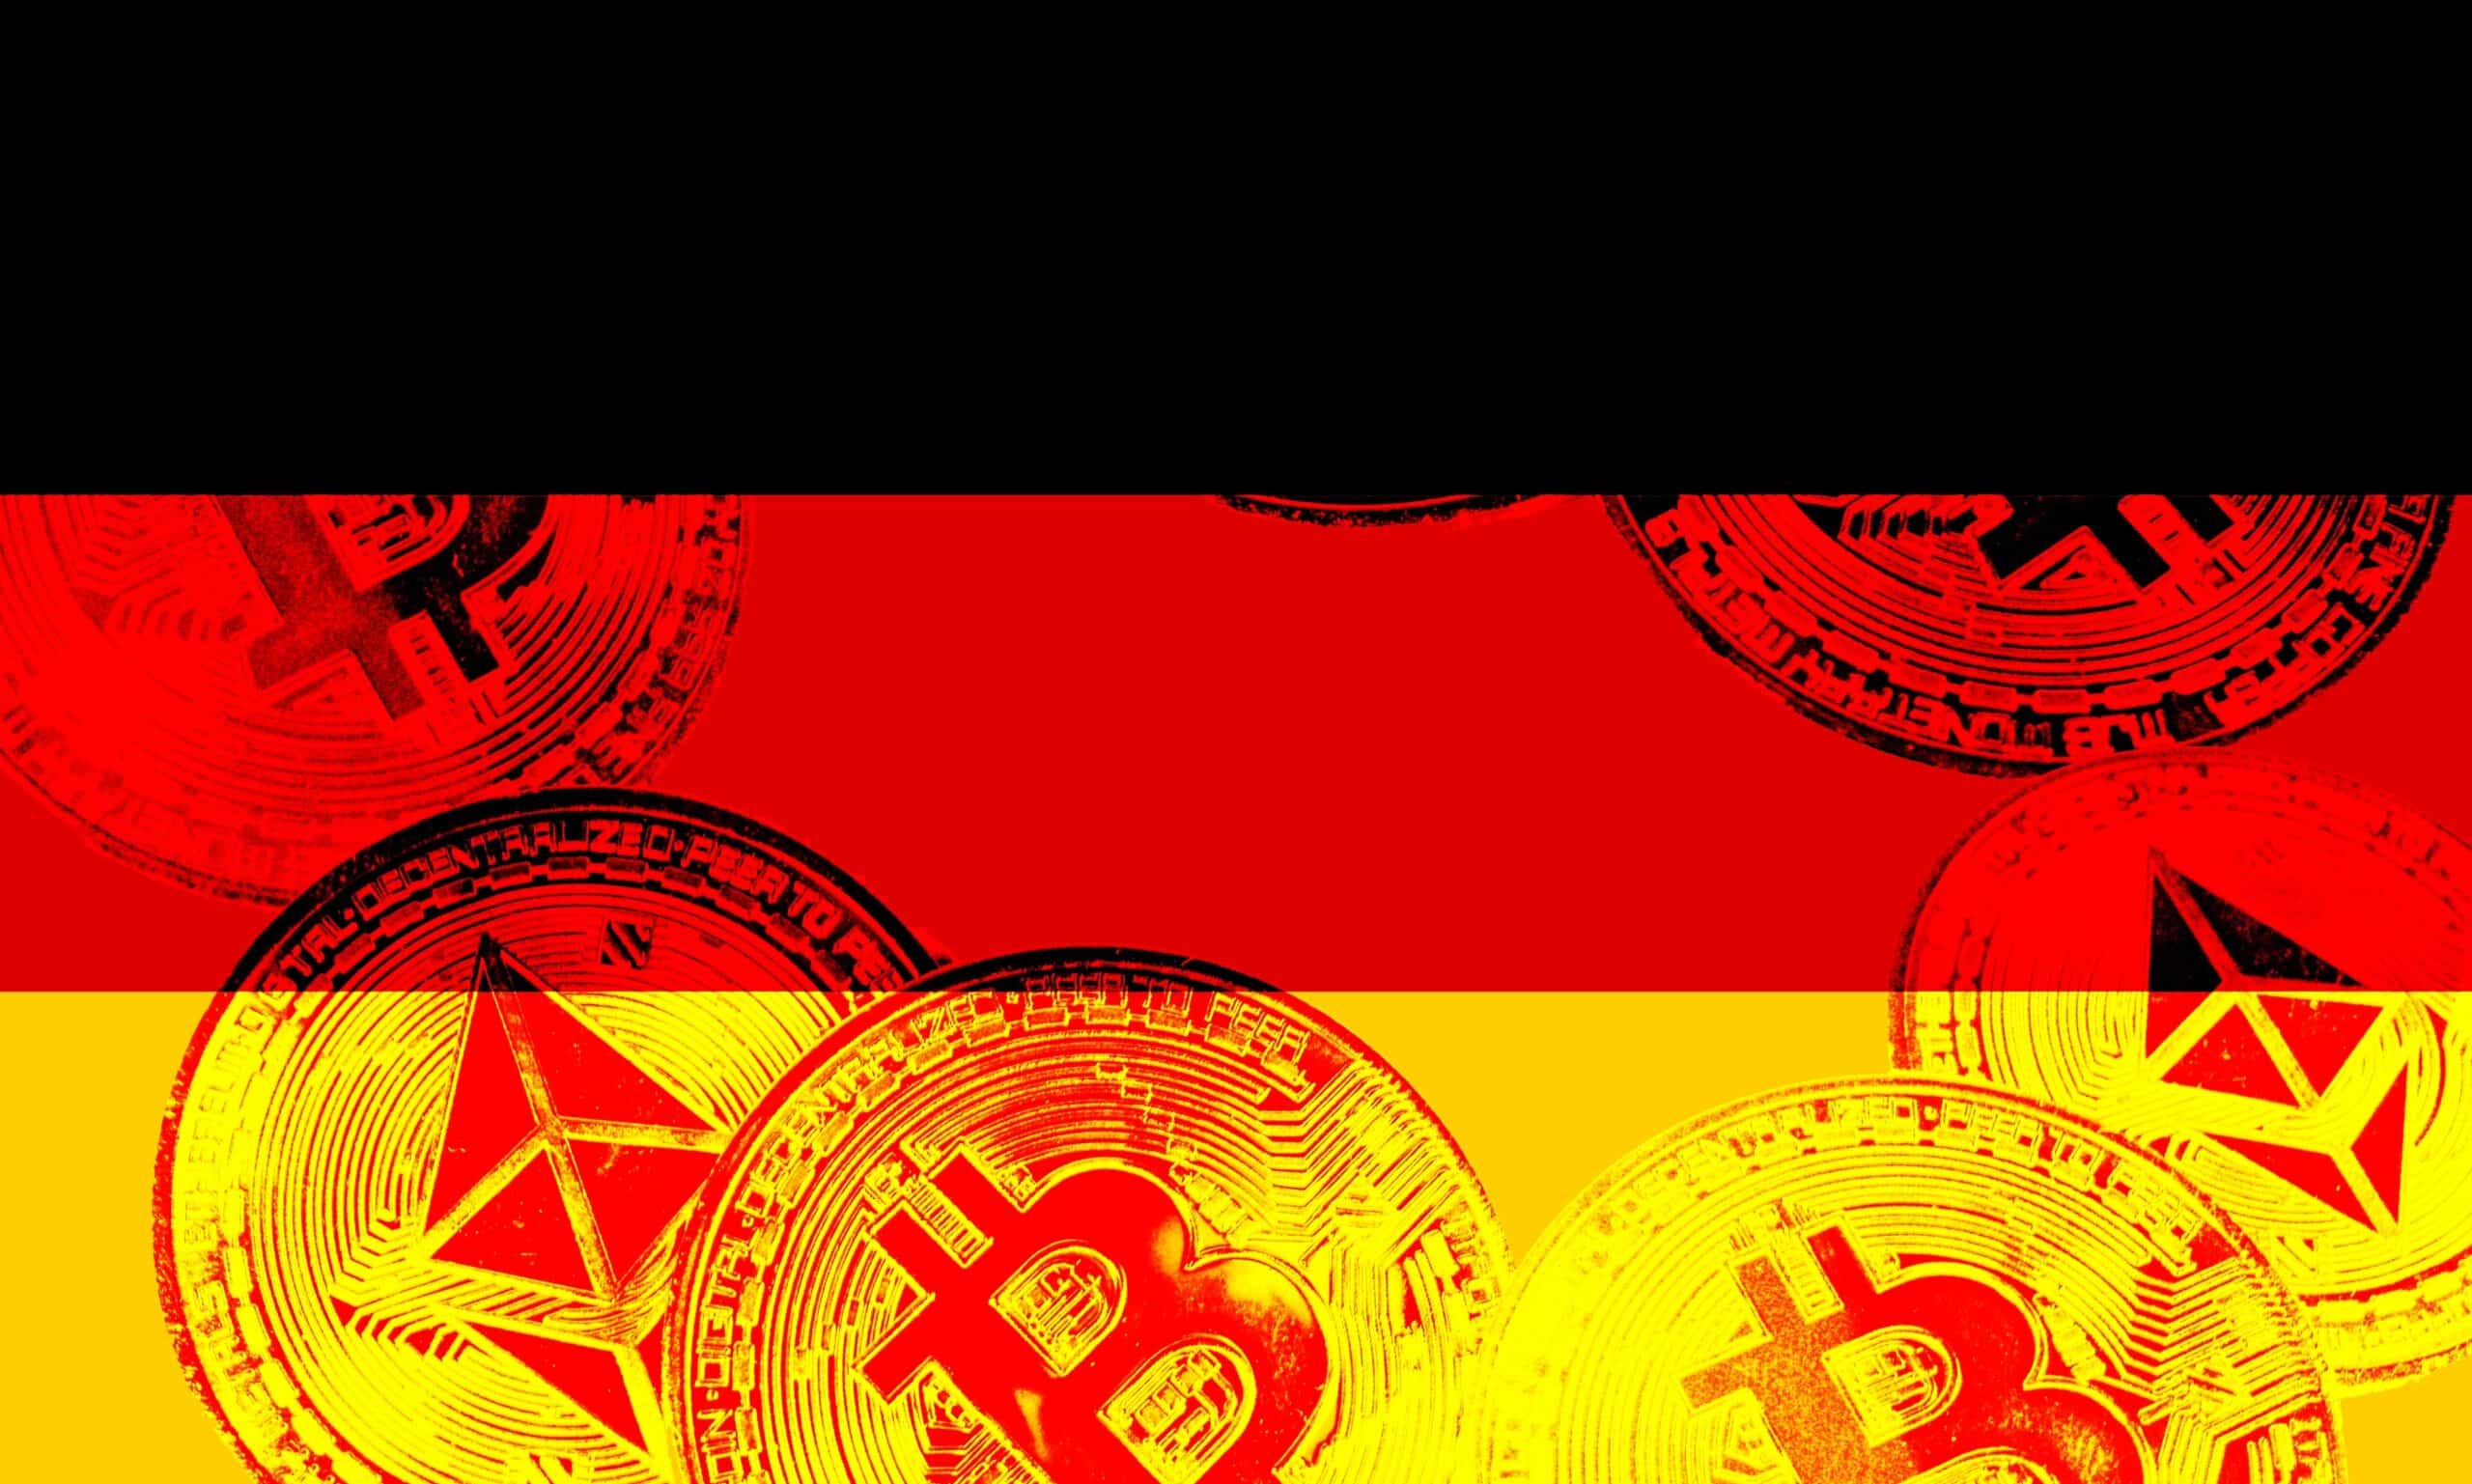 German MP Advocates for Bitcoin, Rejects Digital Euro Over Privacy Concerns